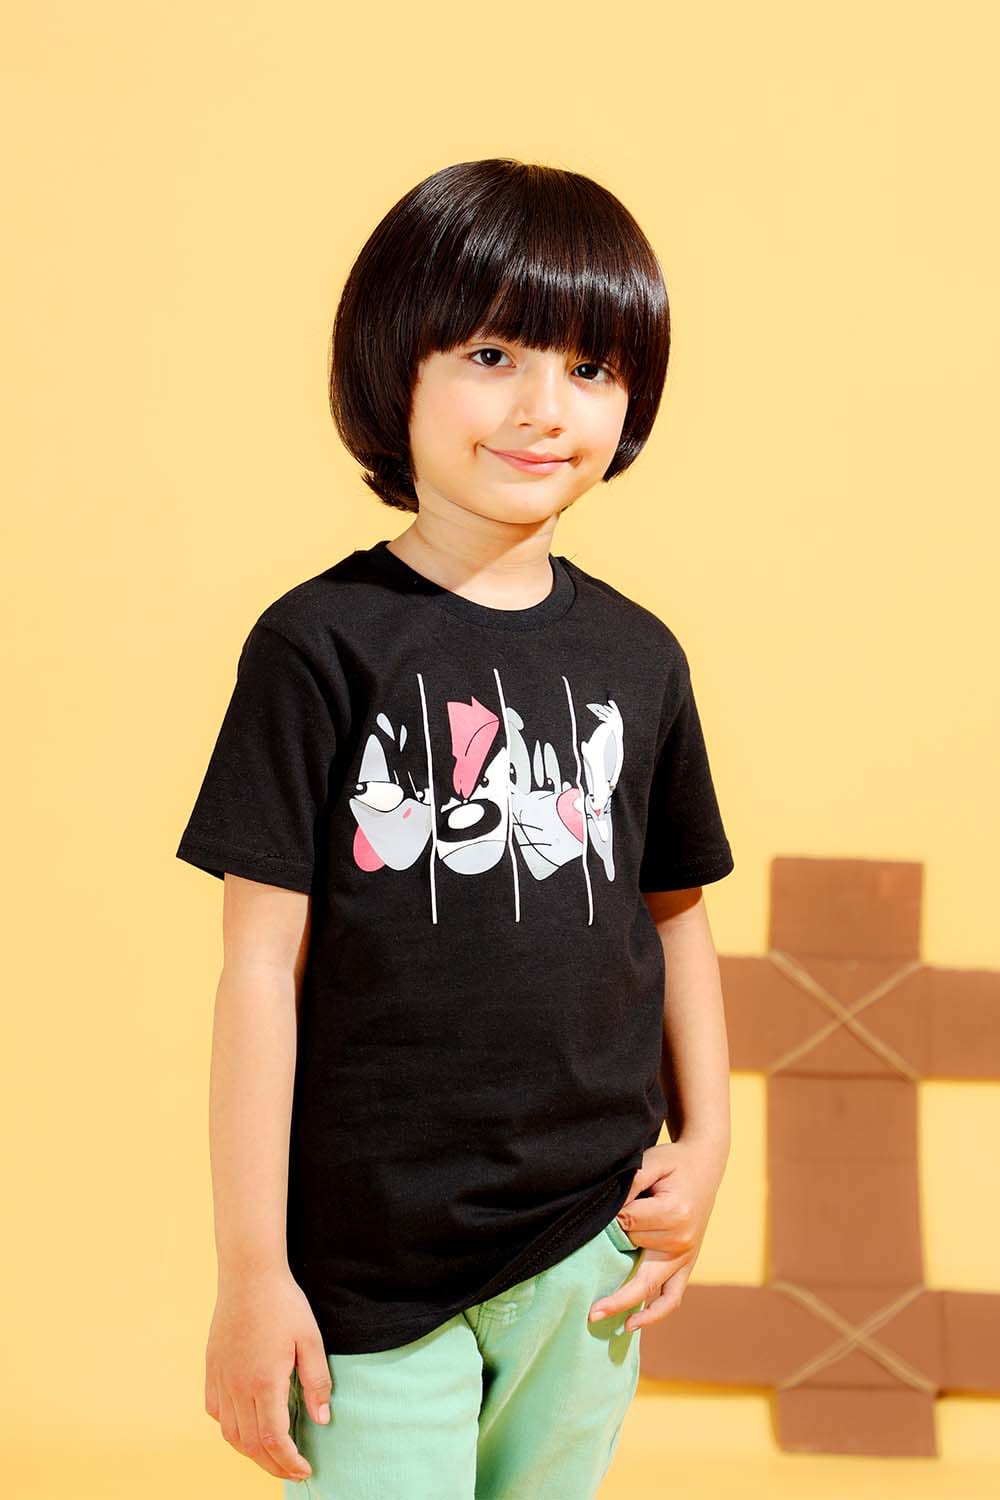 Hope Not Out by Shahid Afridi Boys Knit T-Shirt Black Half Sleeve T-Shirt with Looney Tunes Graphic Print